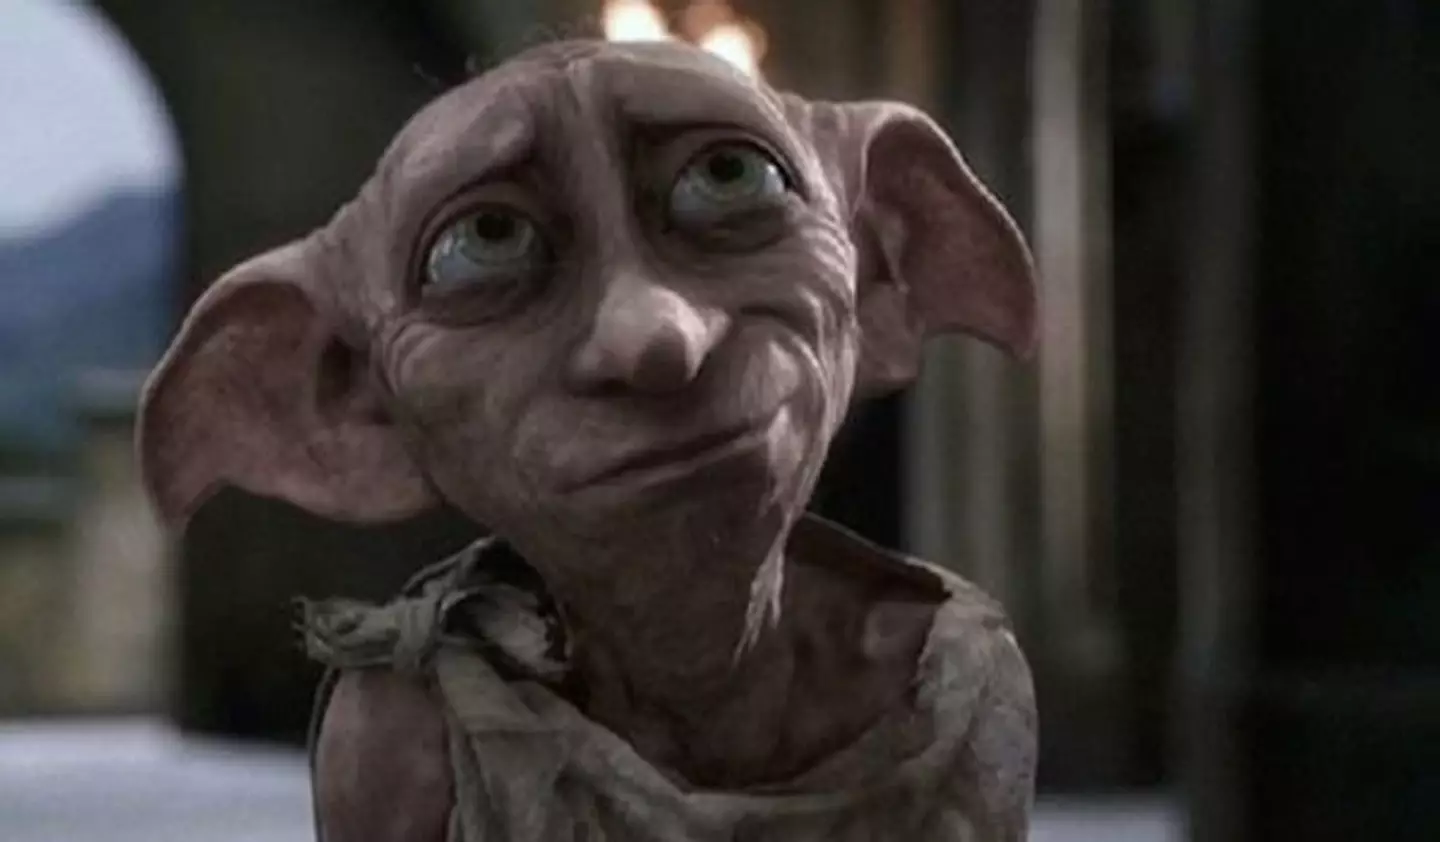 Dobby died in Harry Potter and the Deathly Hallows. (